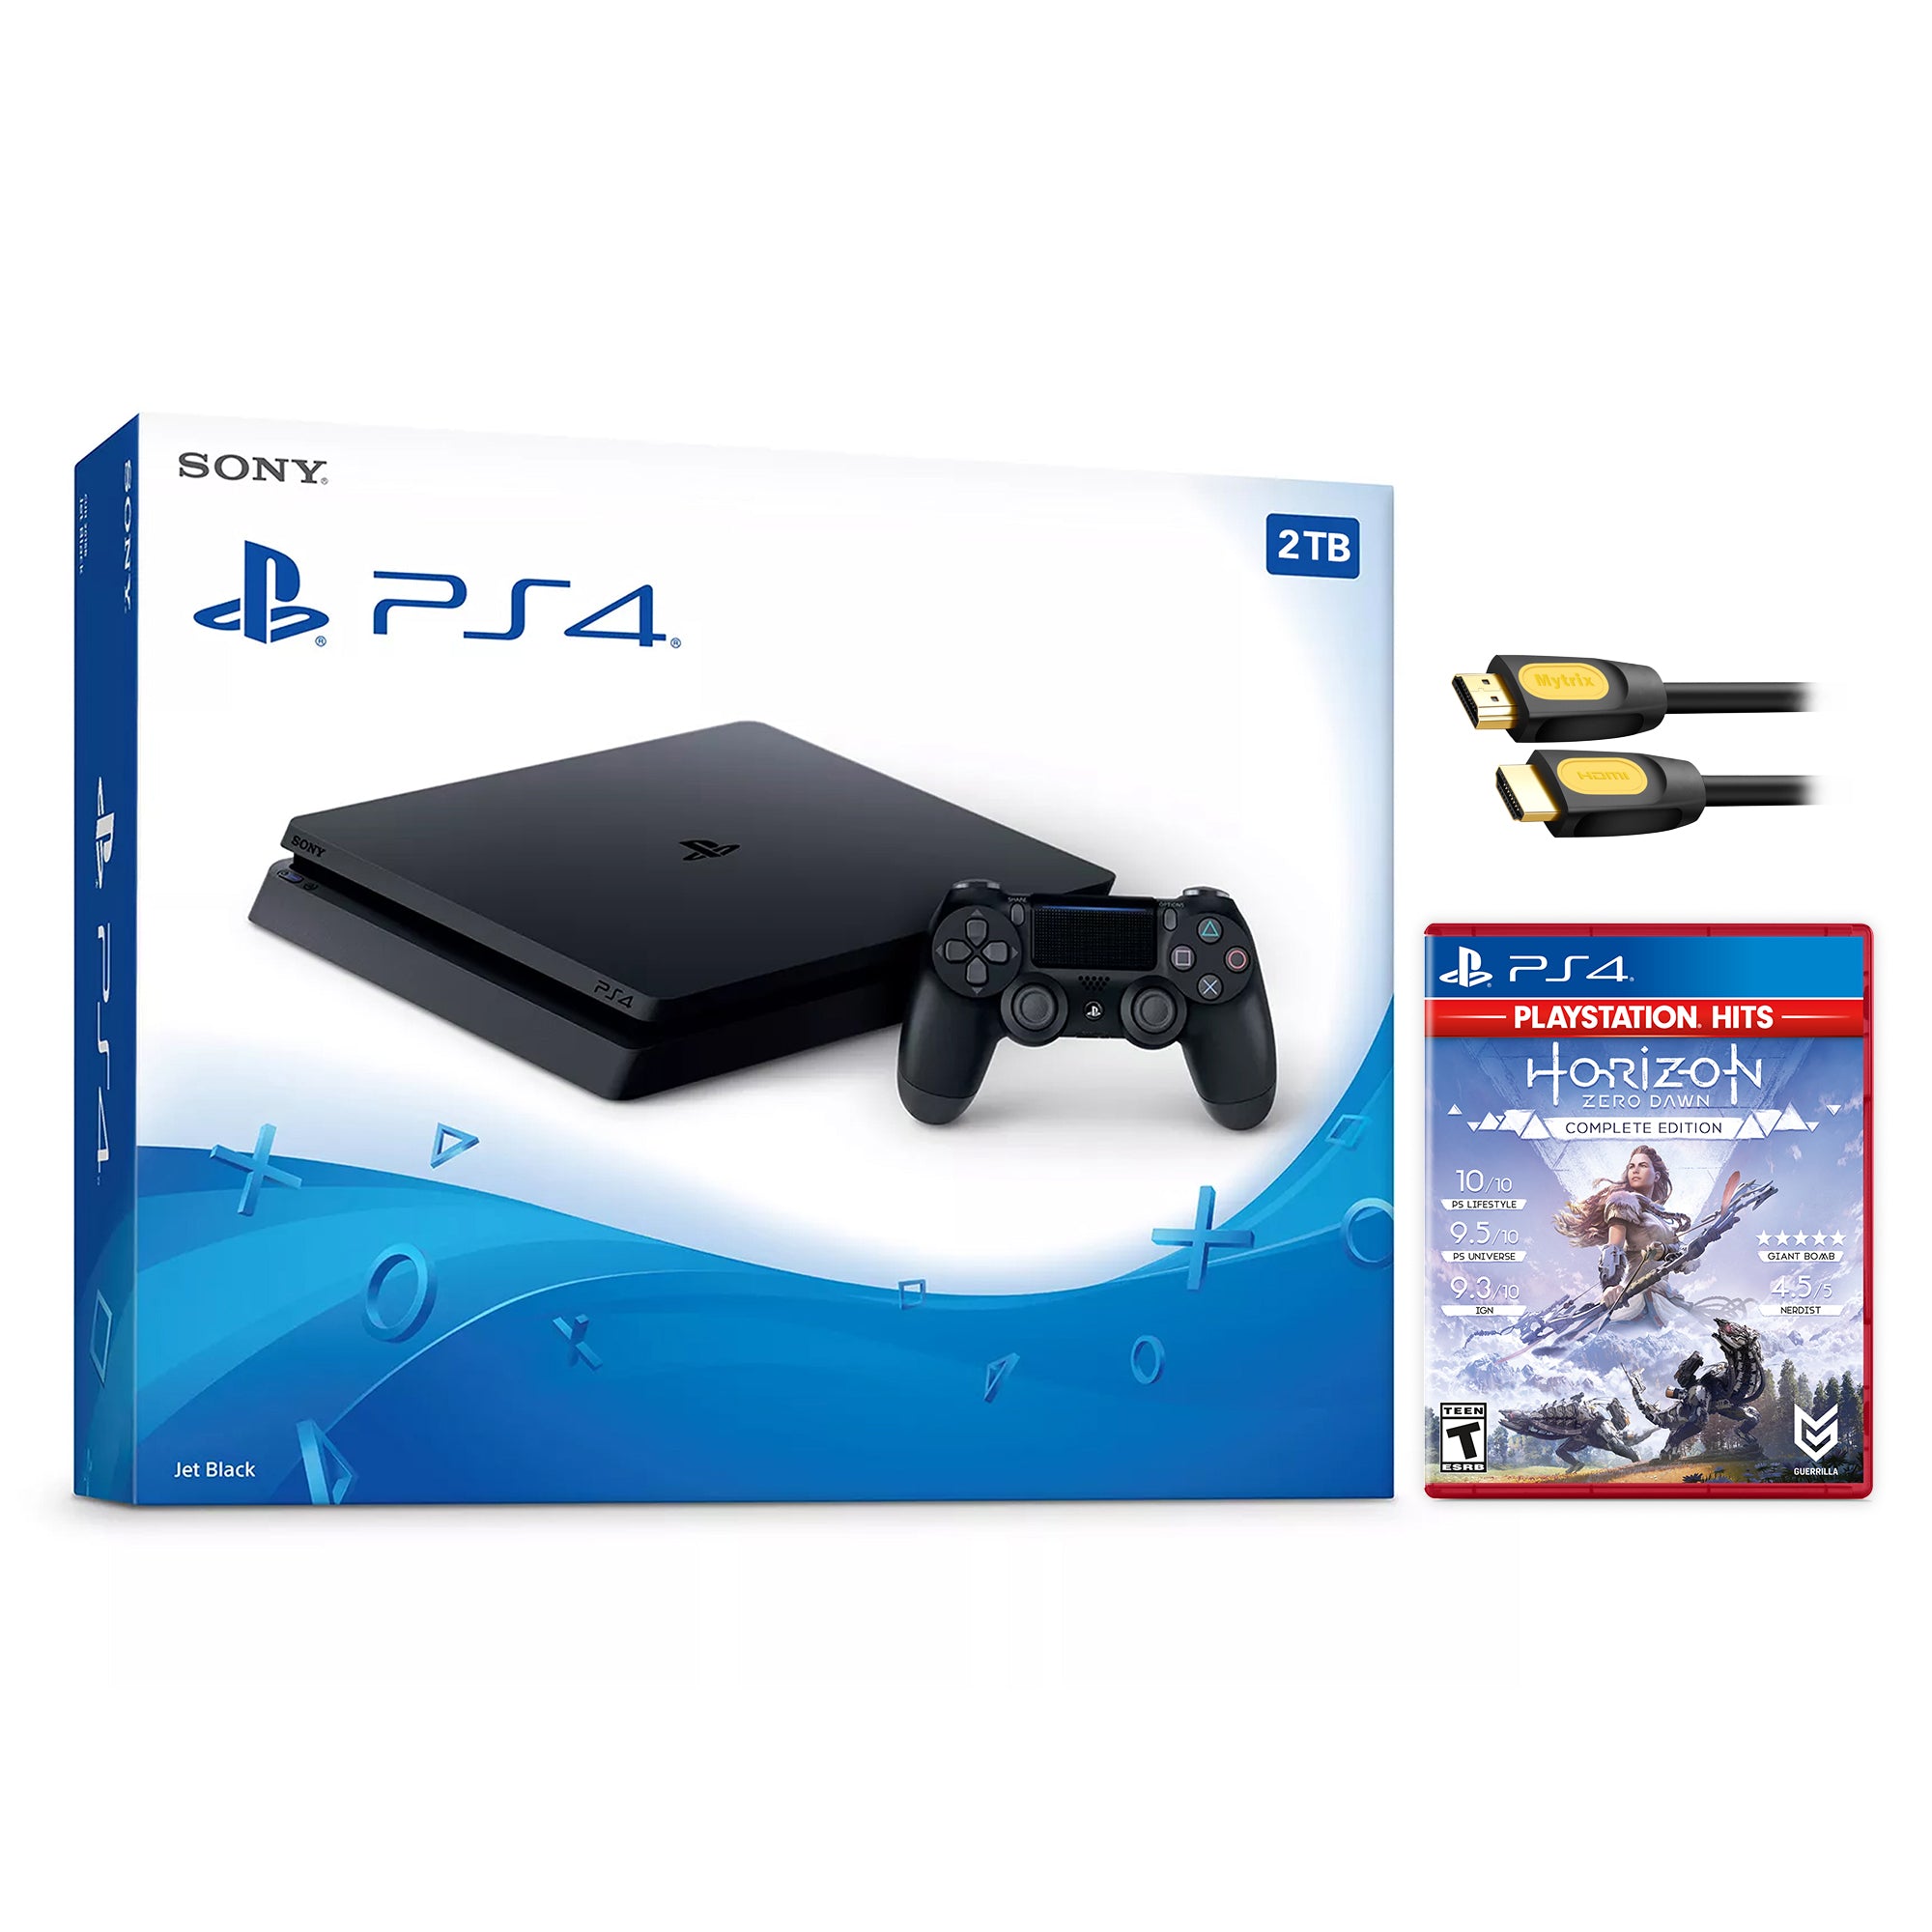 Sony PlayStation 4 Slim Horizon Zero Dawn Bundle Upgrade 2TB HDD PS4 Gaming Console, Jet Black, with Mytrix High Speed HDMI - Large Capacity Internal Hard Drive Enhanced PS4 Console